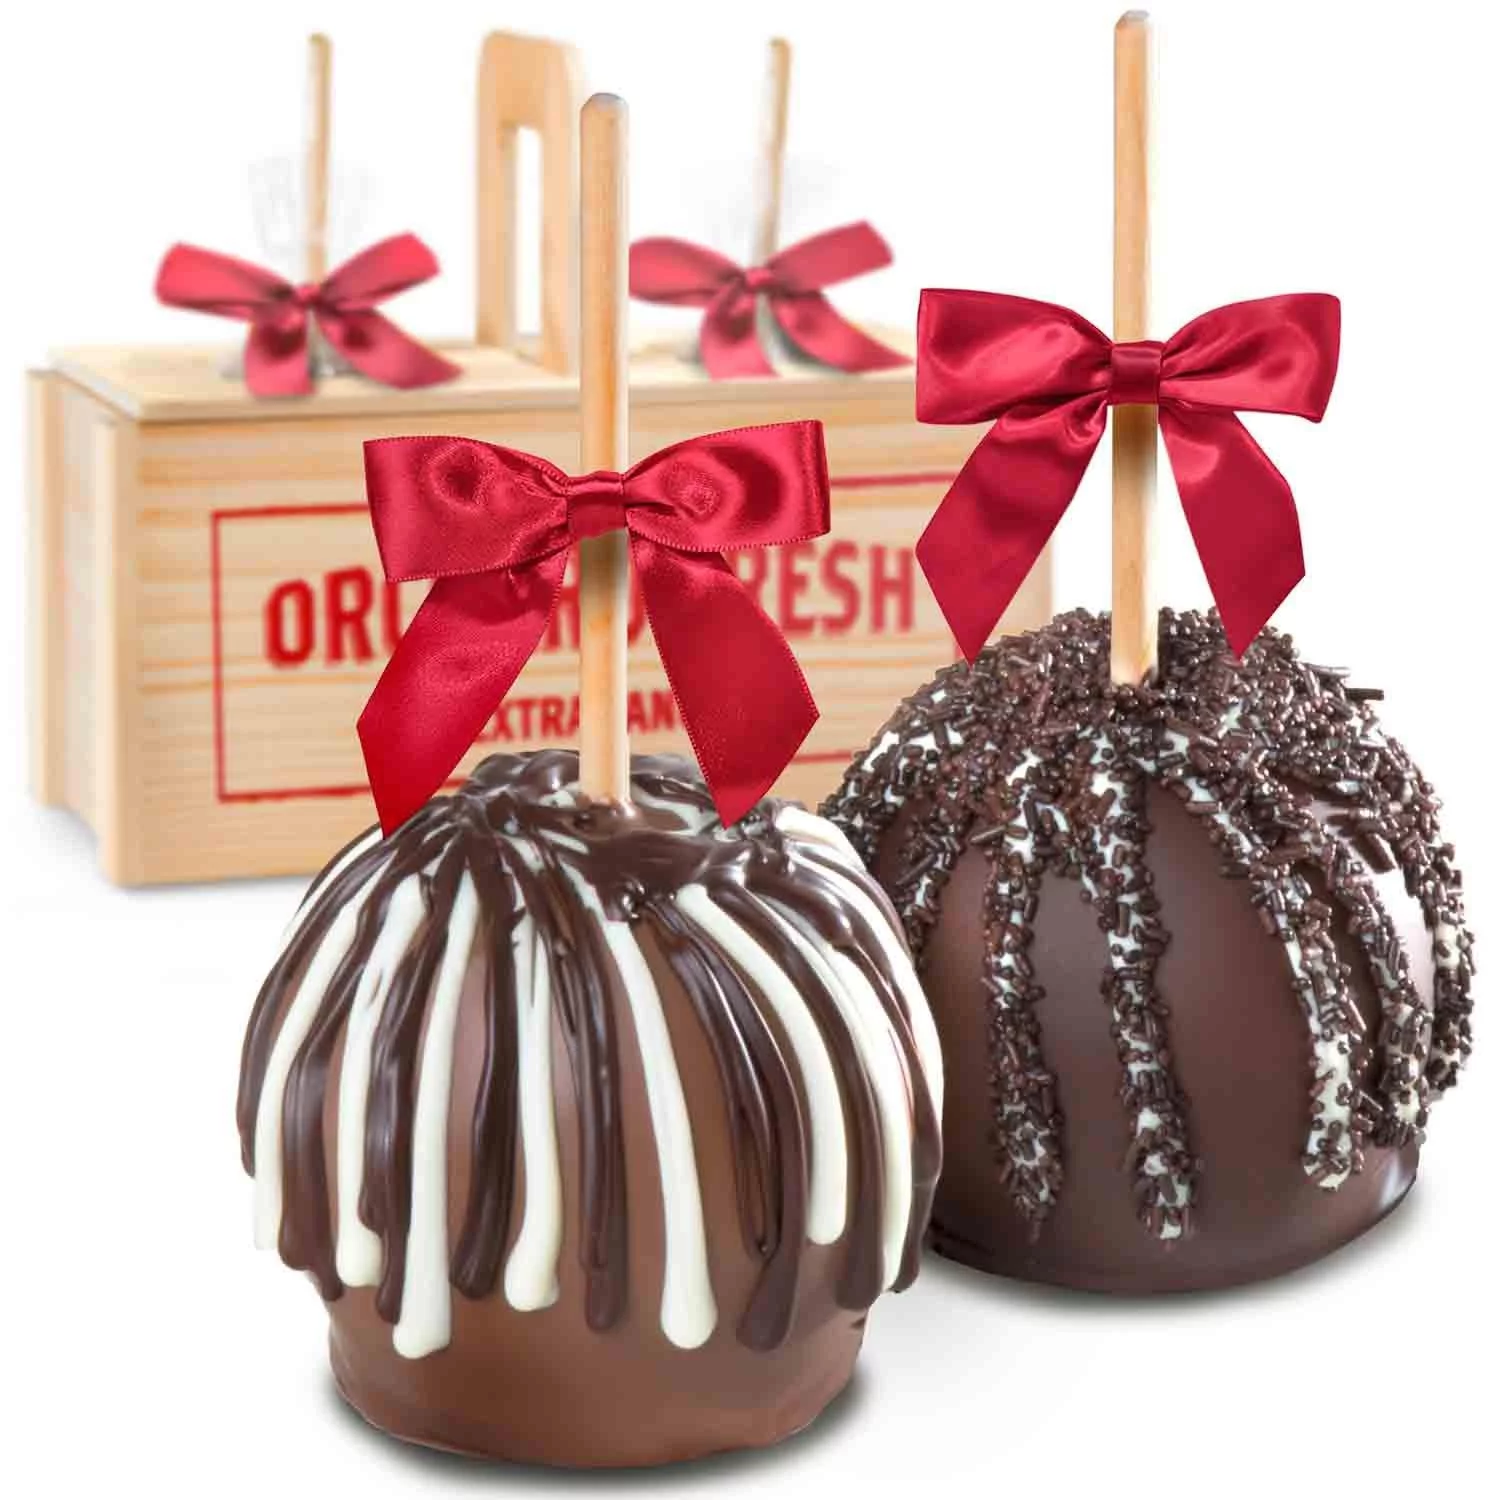 Best Halloween Gifts 2022: Chocolate Dipped Candy Apples 2022